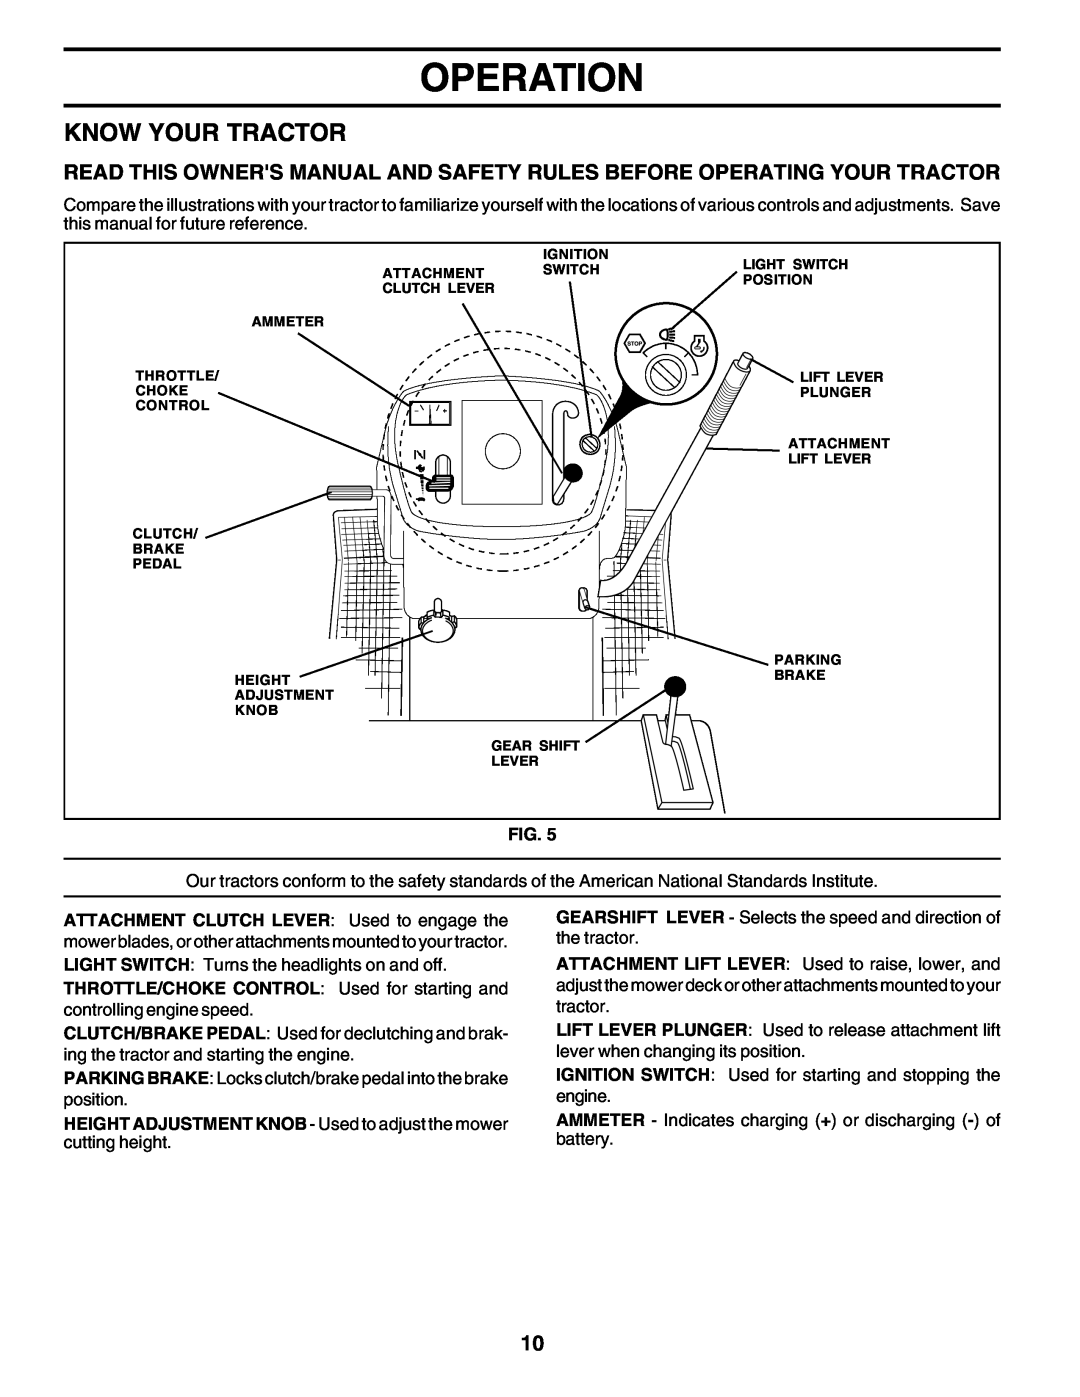 Poulan 180198 owner manual Know Your Tractor, Operation, HEIGHT ADJUSTMENT KNOB - Used to adjust the mower cutting height 